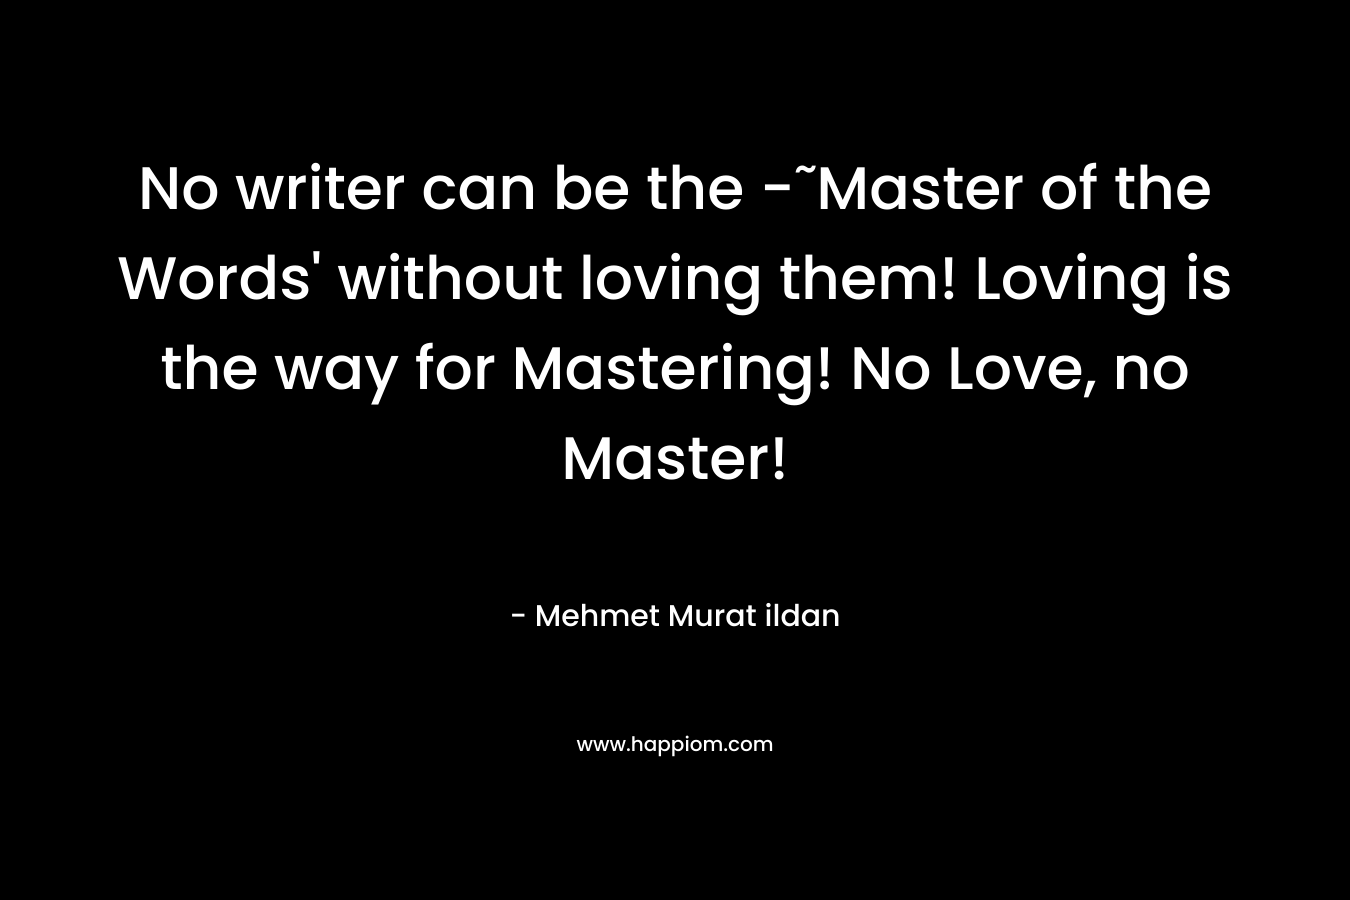 No writer can be the -˜Master of the Words' without loving them! Loving is the way for Mastering! No Love, no Master!